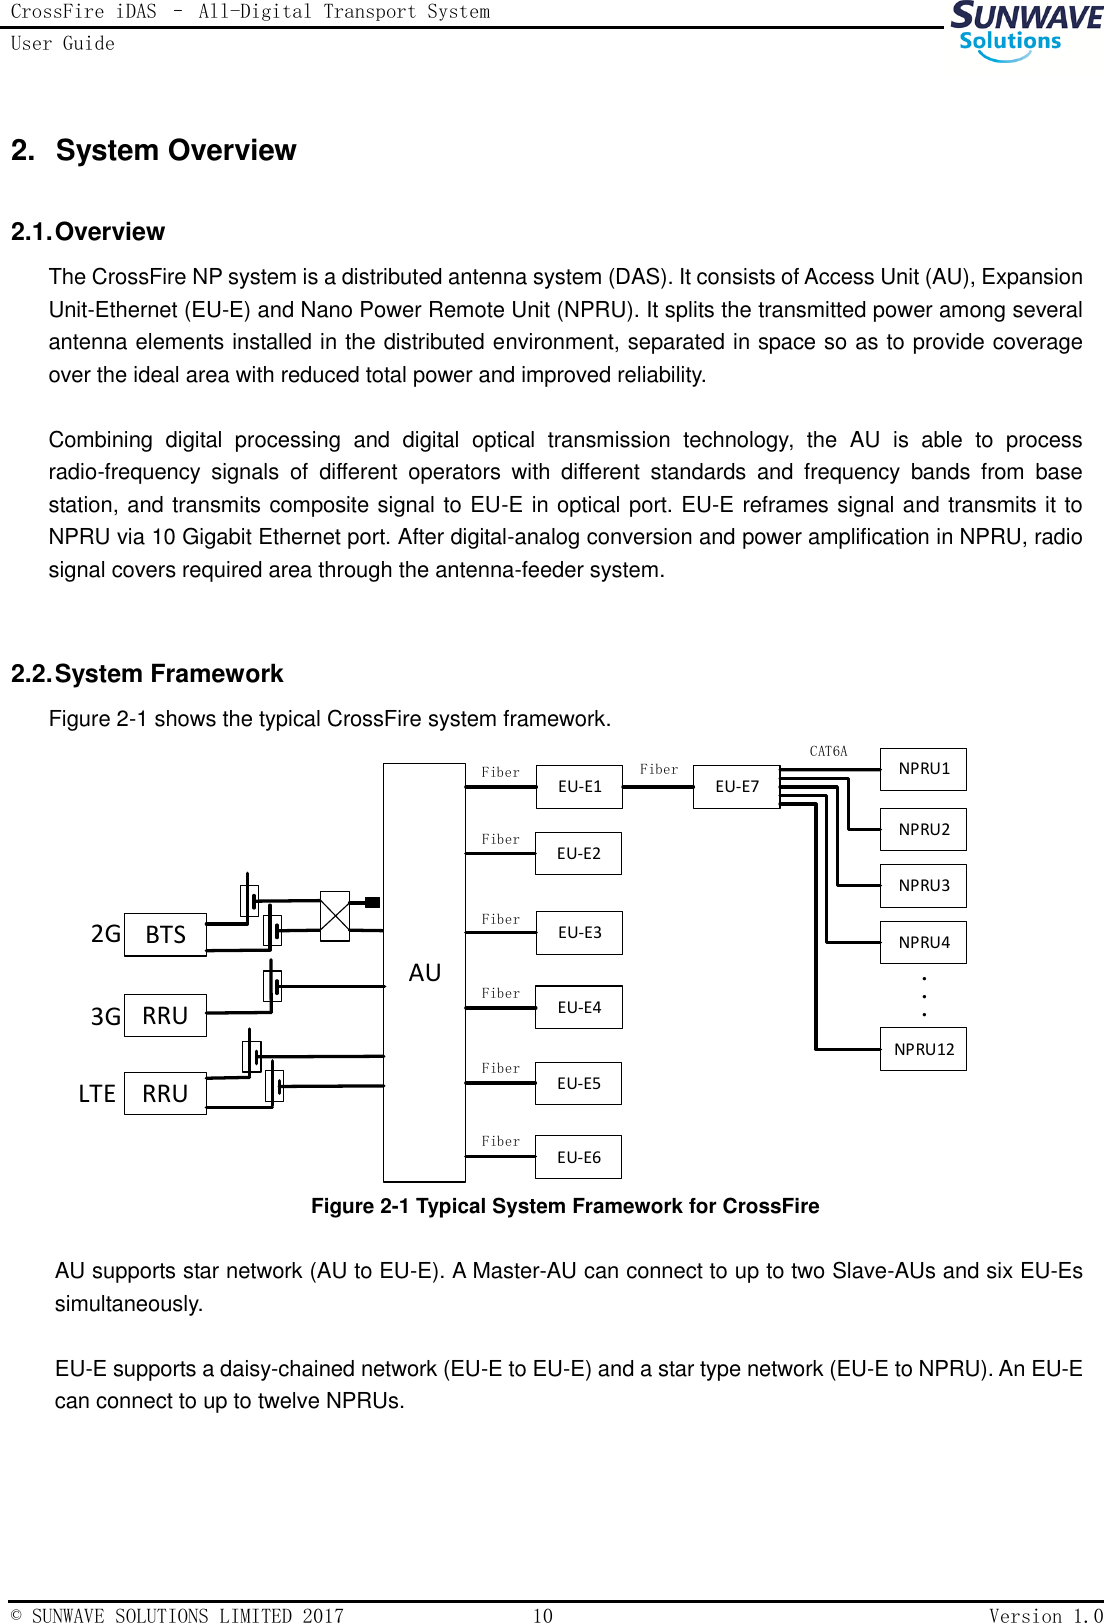 CrossFire iDAS – All-Digital Transport System User Guide   © SUNWAVE SOLUTIONS LIMITED 2017  10  Version 1.0  2.  System Overview 2.1. Overview The CrossFire NP system is a distributed antenna system (DAS). It consists of Access Unit (AU), Expansion Unit-Ethernet (EU-E) and Nano Power Remote Unit (NPRU). It splits the transmitted power among several antenna elements installed in the distributed environment, separated in space so as to provide coverage over the ideal area with reduced total power and improved reliability.  Combining  digital  processing  and  digital  optical  transmission  technology,  the  AU  is  able  to  process radio-frequency  signals  of  different  operators  with  different  standards  and  frequency  bands  from  base station, and transmits composite signal to EU-E in optical port. EU-E reframes signal and transmits it to NPRU via 10 Gigabit Ethernet port. After digital-analog conversion and power amplification in NPRU, radio signal covers required area through the antenna-feeder system.  2.2. System Framework Figure 2-1 shows the typical CrossFire system framework. BTSRRU2G3GRRULTEAUEU-E1 EU-E7EU-E2EU-E3EU-E4NPRU1EU-E5EU-E6···NPRU2NPRU3NPRU4NPRU12FiberCAT6AFiberFiberFiberFiberFiberFiber Figure 2-1 Typical System Framework for CrossFire  AU supports star network (AU to EU-E). A Master-AU can connect to up to two Slave-AUs and six EU-Es simultaneously.  EU-E supports a daisy-chained network (EU-E to EU-E) and a star type network (EU-E to NPRU). An EU-E can connect to up to twelve NPRUs. 